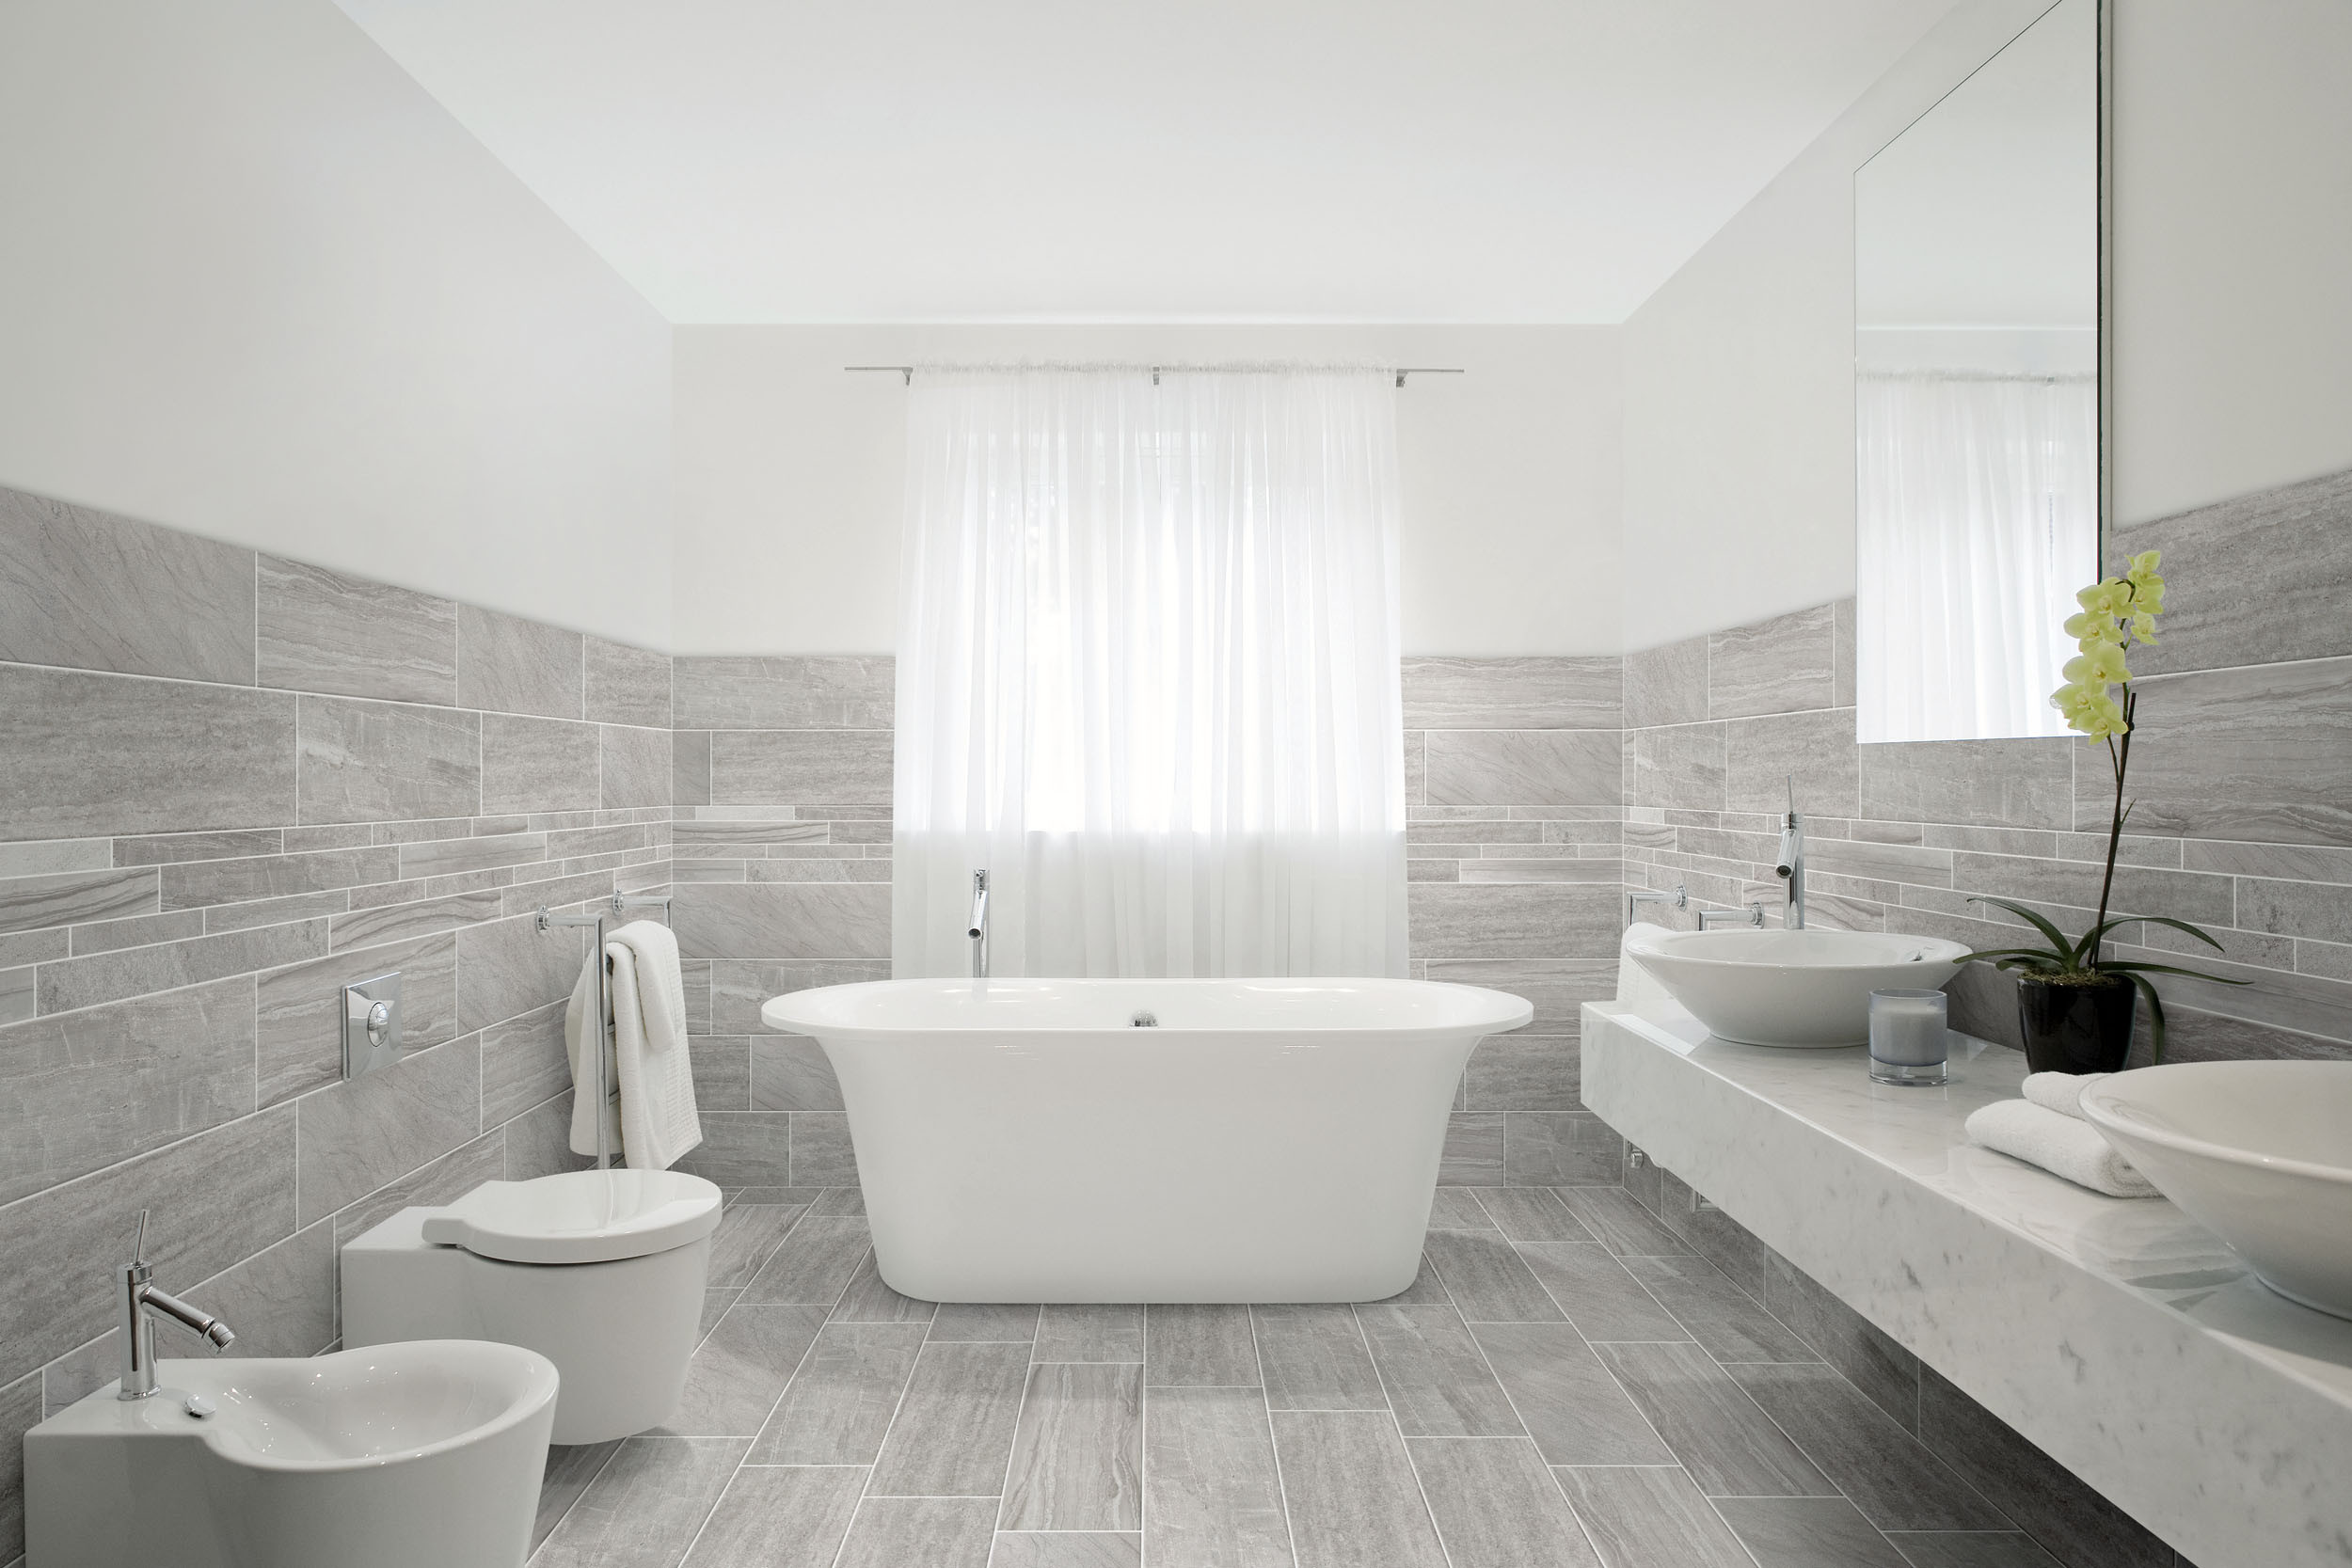 Gray Bathroom Wall Tile
 Porcelain Tile With Mixed Look of Wood Stone and Concrete